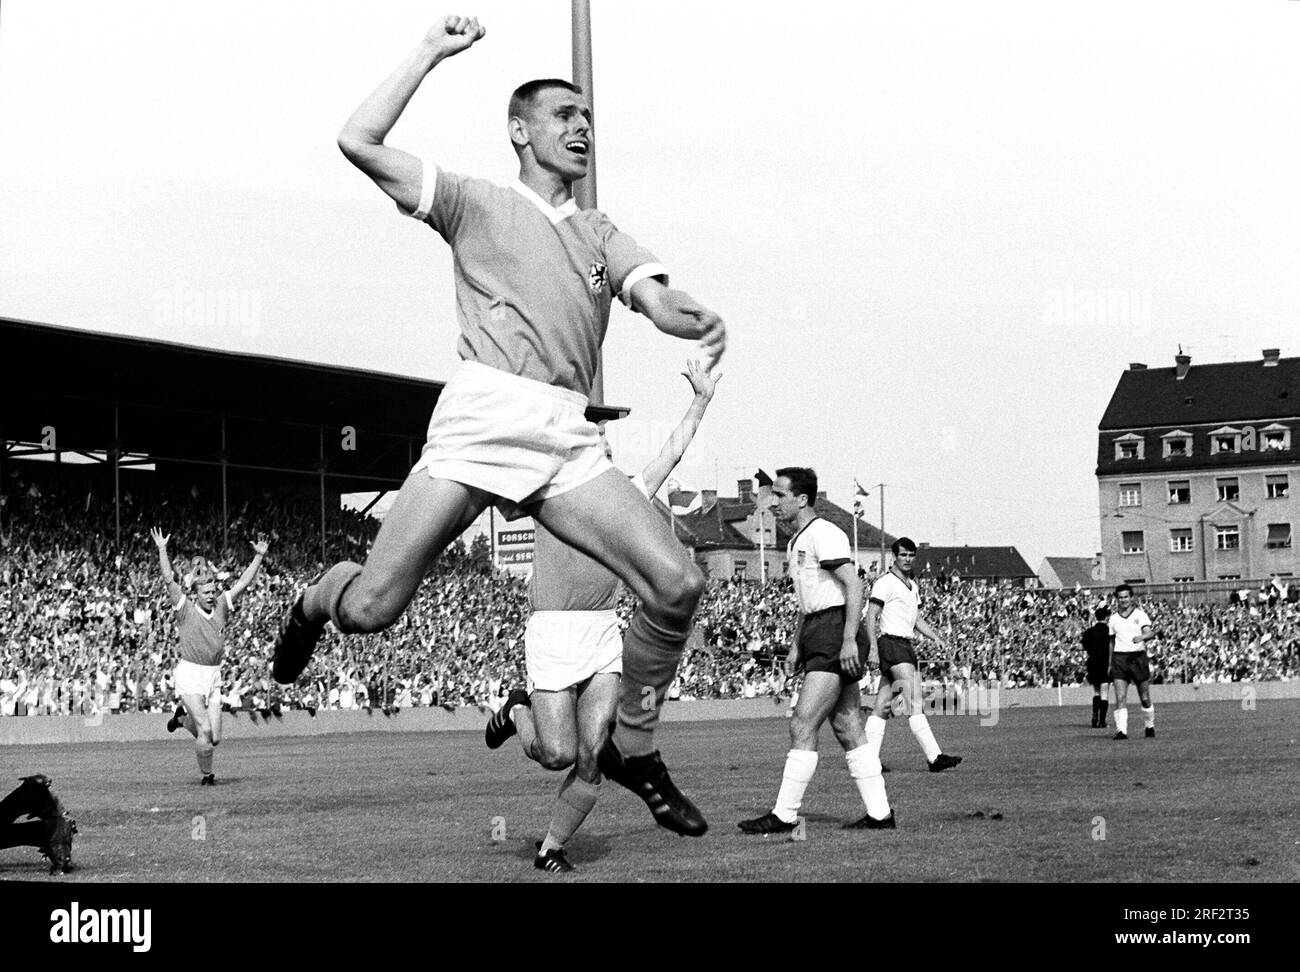 ARCHIVE PHOTO: Friedhelm Timo KONIETZKA would have been 85 years old on August 2nd, 2023, 02SN 1860 FCB 140865SP.jpg Friedhelm 'Timo' KONIETZKA (D.), TSV Munich 1860, celebrates after his goal to 1:0; first local derby derby of the two teams in the Bundesliga, landscape format; black and white shot; Soccer Bundesliga TSV Munich 1860 - FC Bayern Munich 1:0, on August 14, 1965, first matchday of the 1965/66 season; ?SVEN SIMON, Princess-Luise-Str.41#45479 Muelheim/Ruhr#tel.0208/9413250#fax 0208/9413260#account 1428150 Commerzbank Essen BLZ 36040039#www.SvenSimon.net#e-mail:SvenSimon@t -online.de Stock Photo